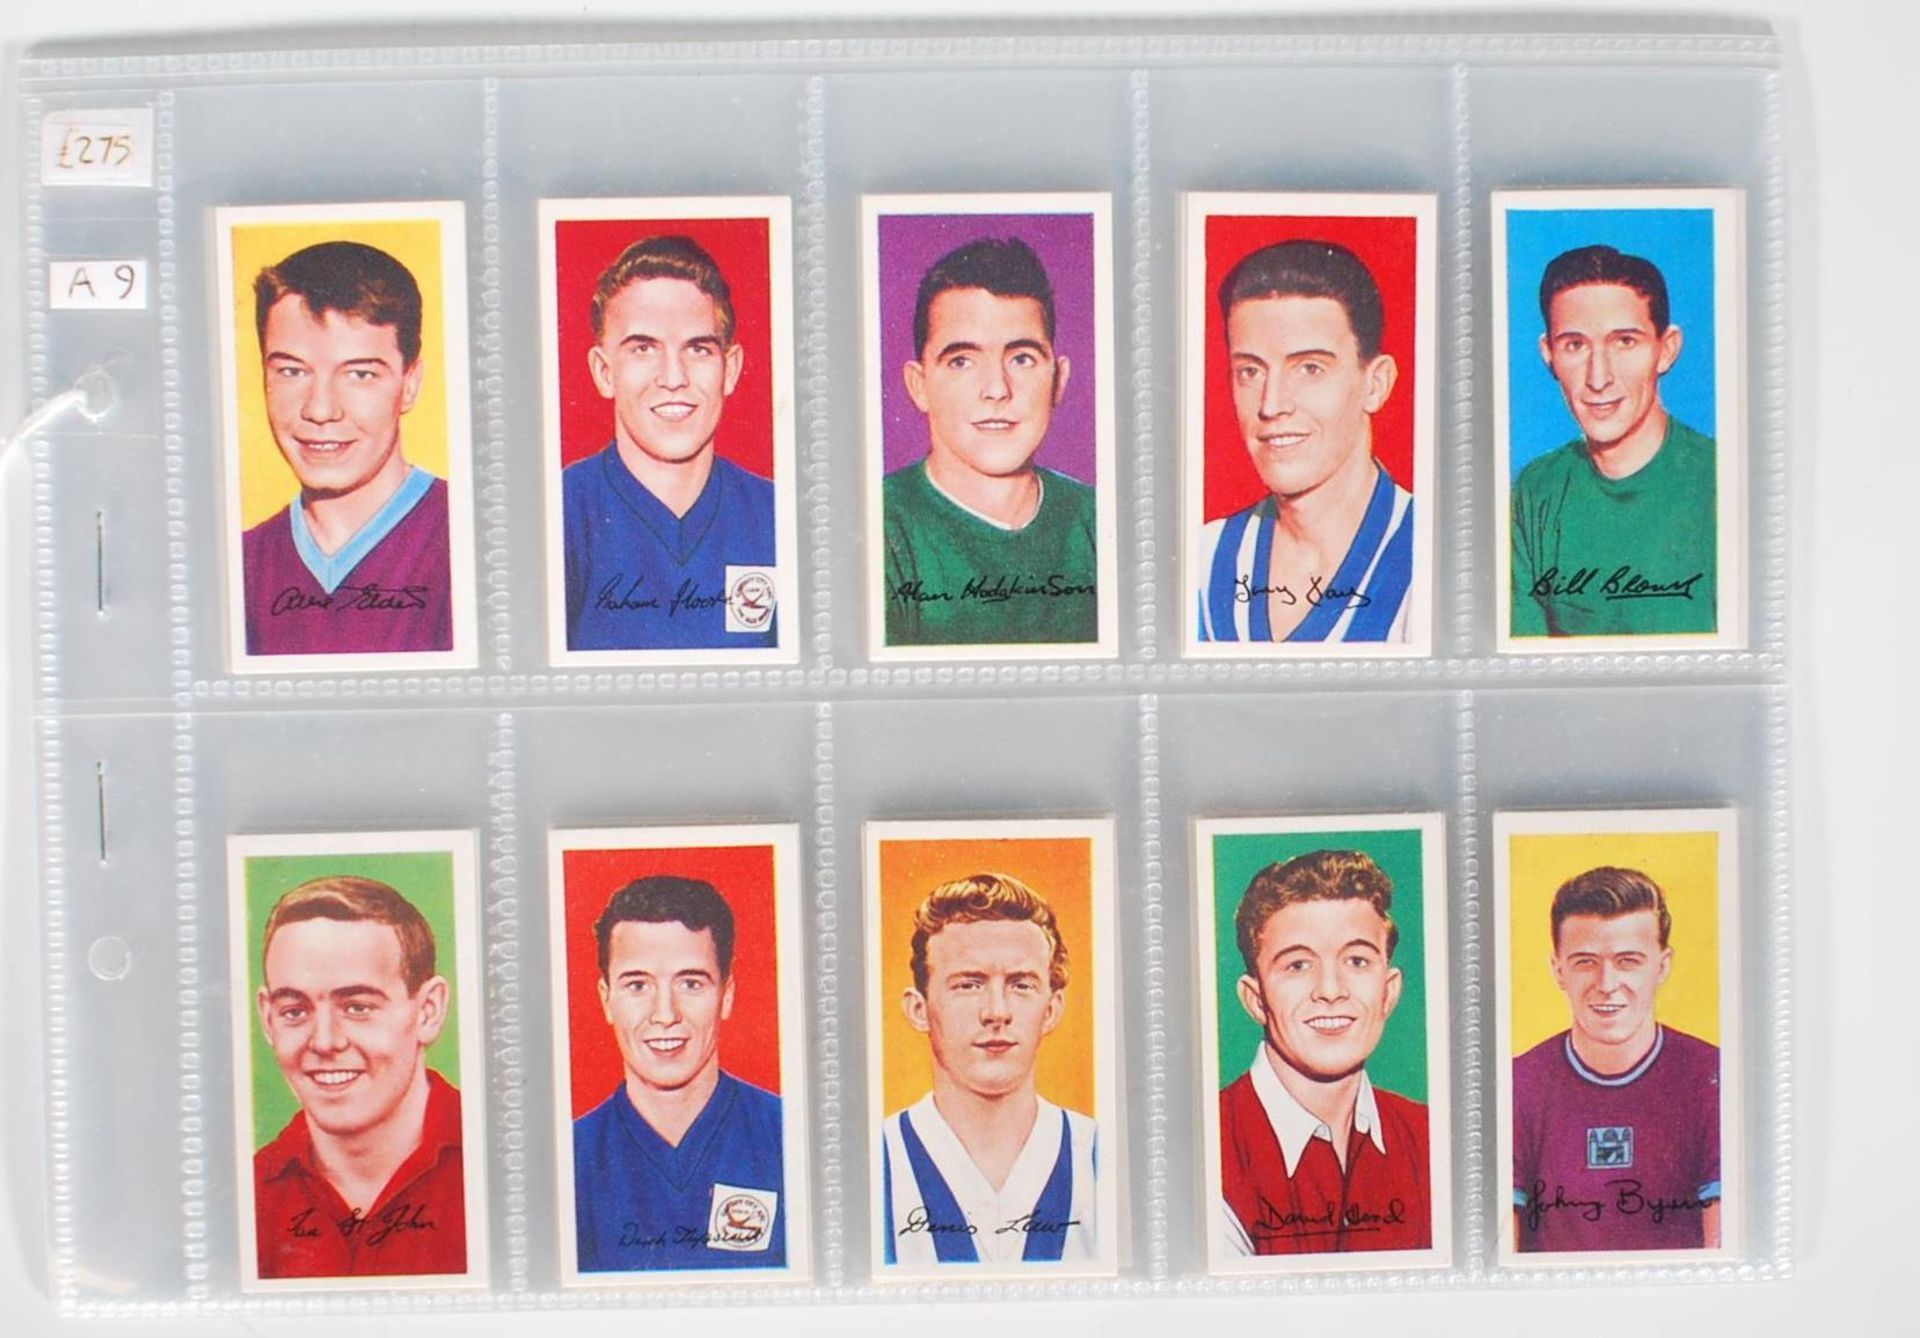 A full set of Barratt & Co Confectionery / Sweet trade cards. Famous Footballers Series A. 9